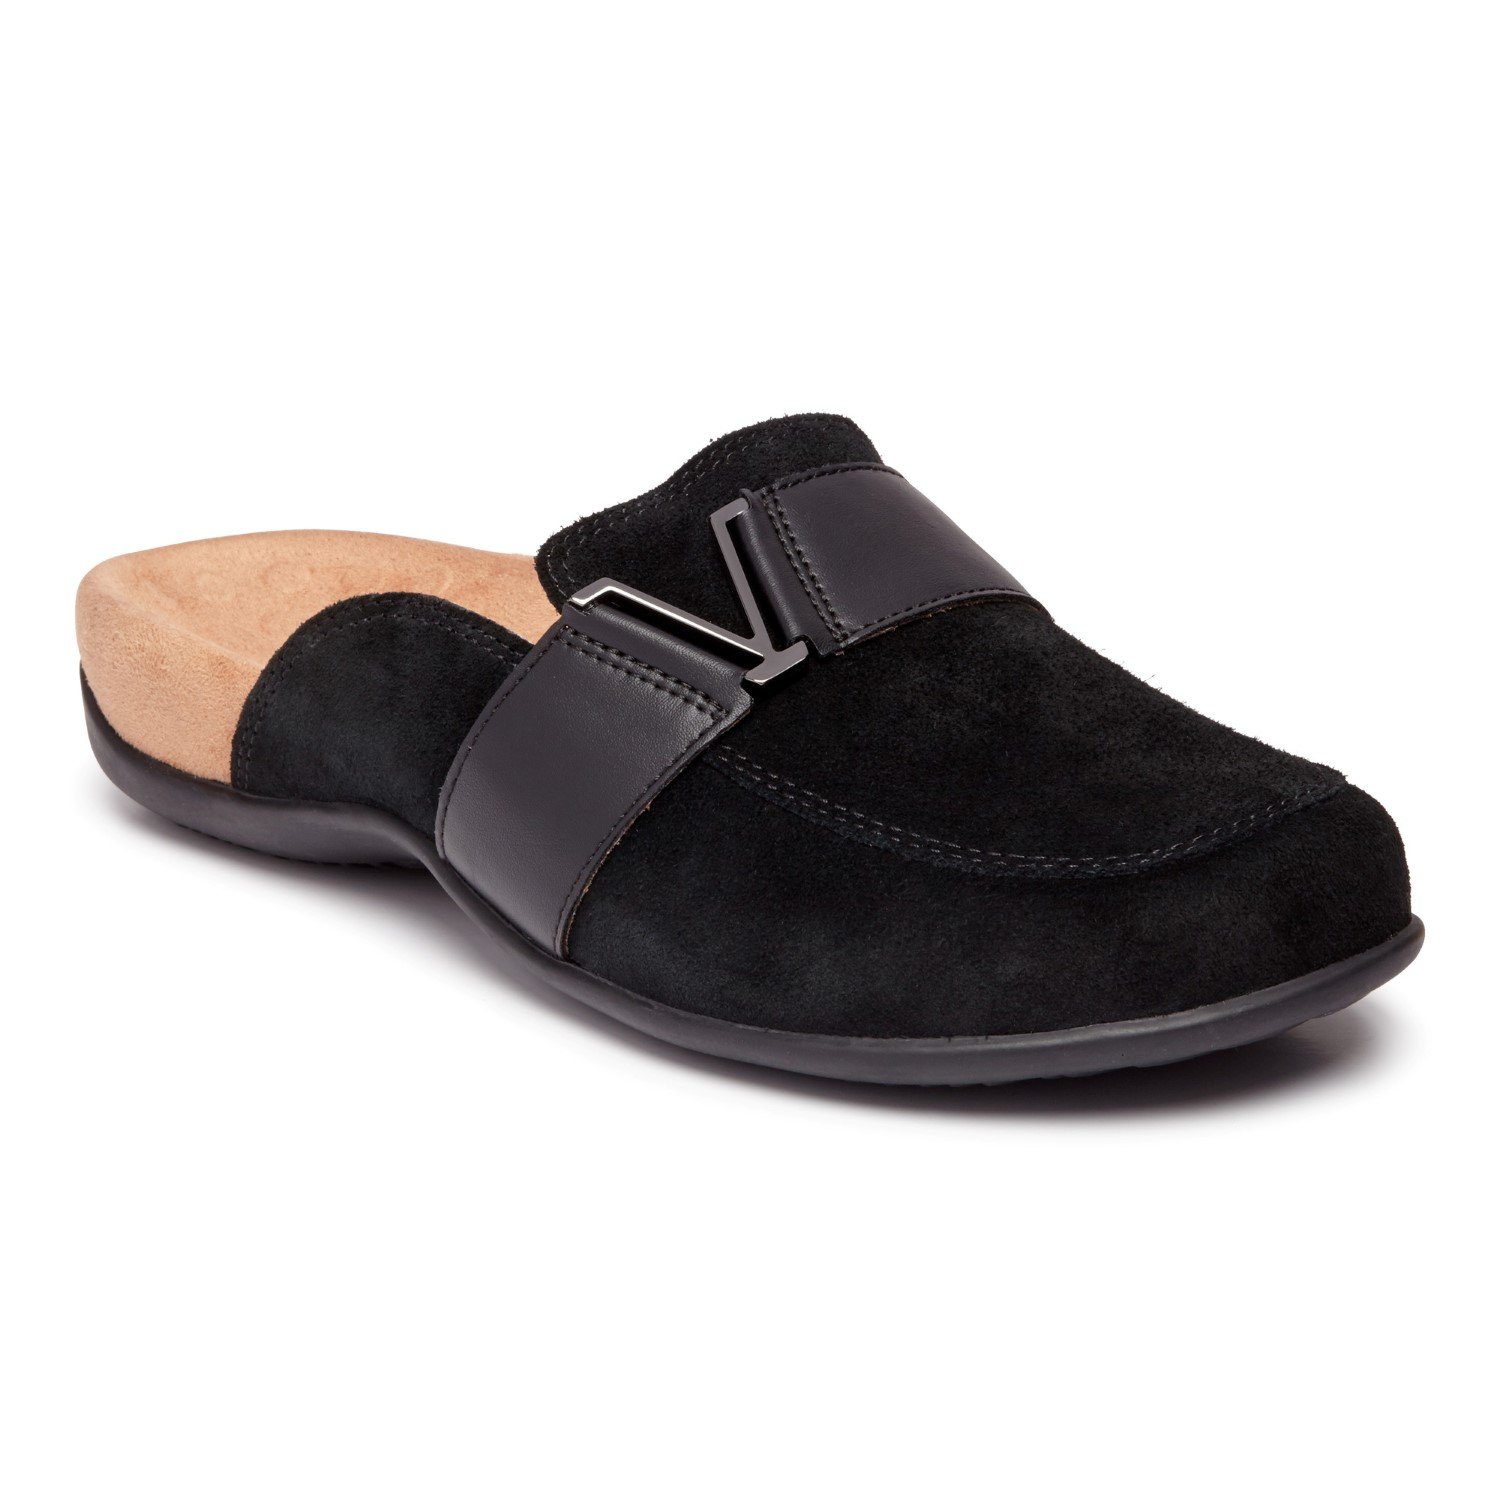 Clog/mule With Arch Support 